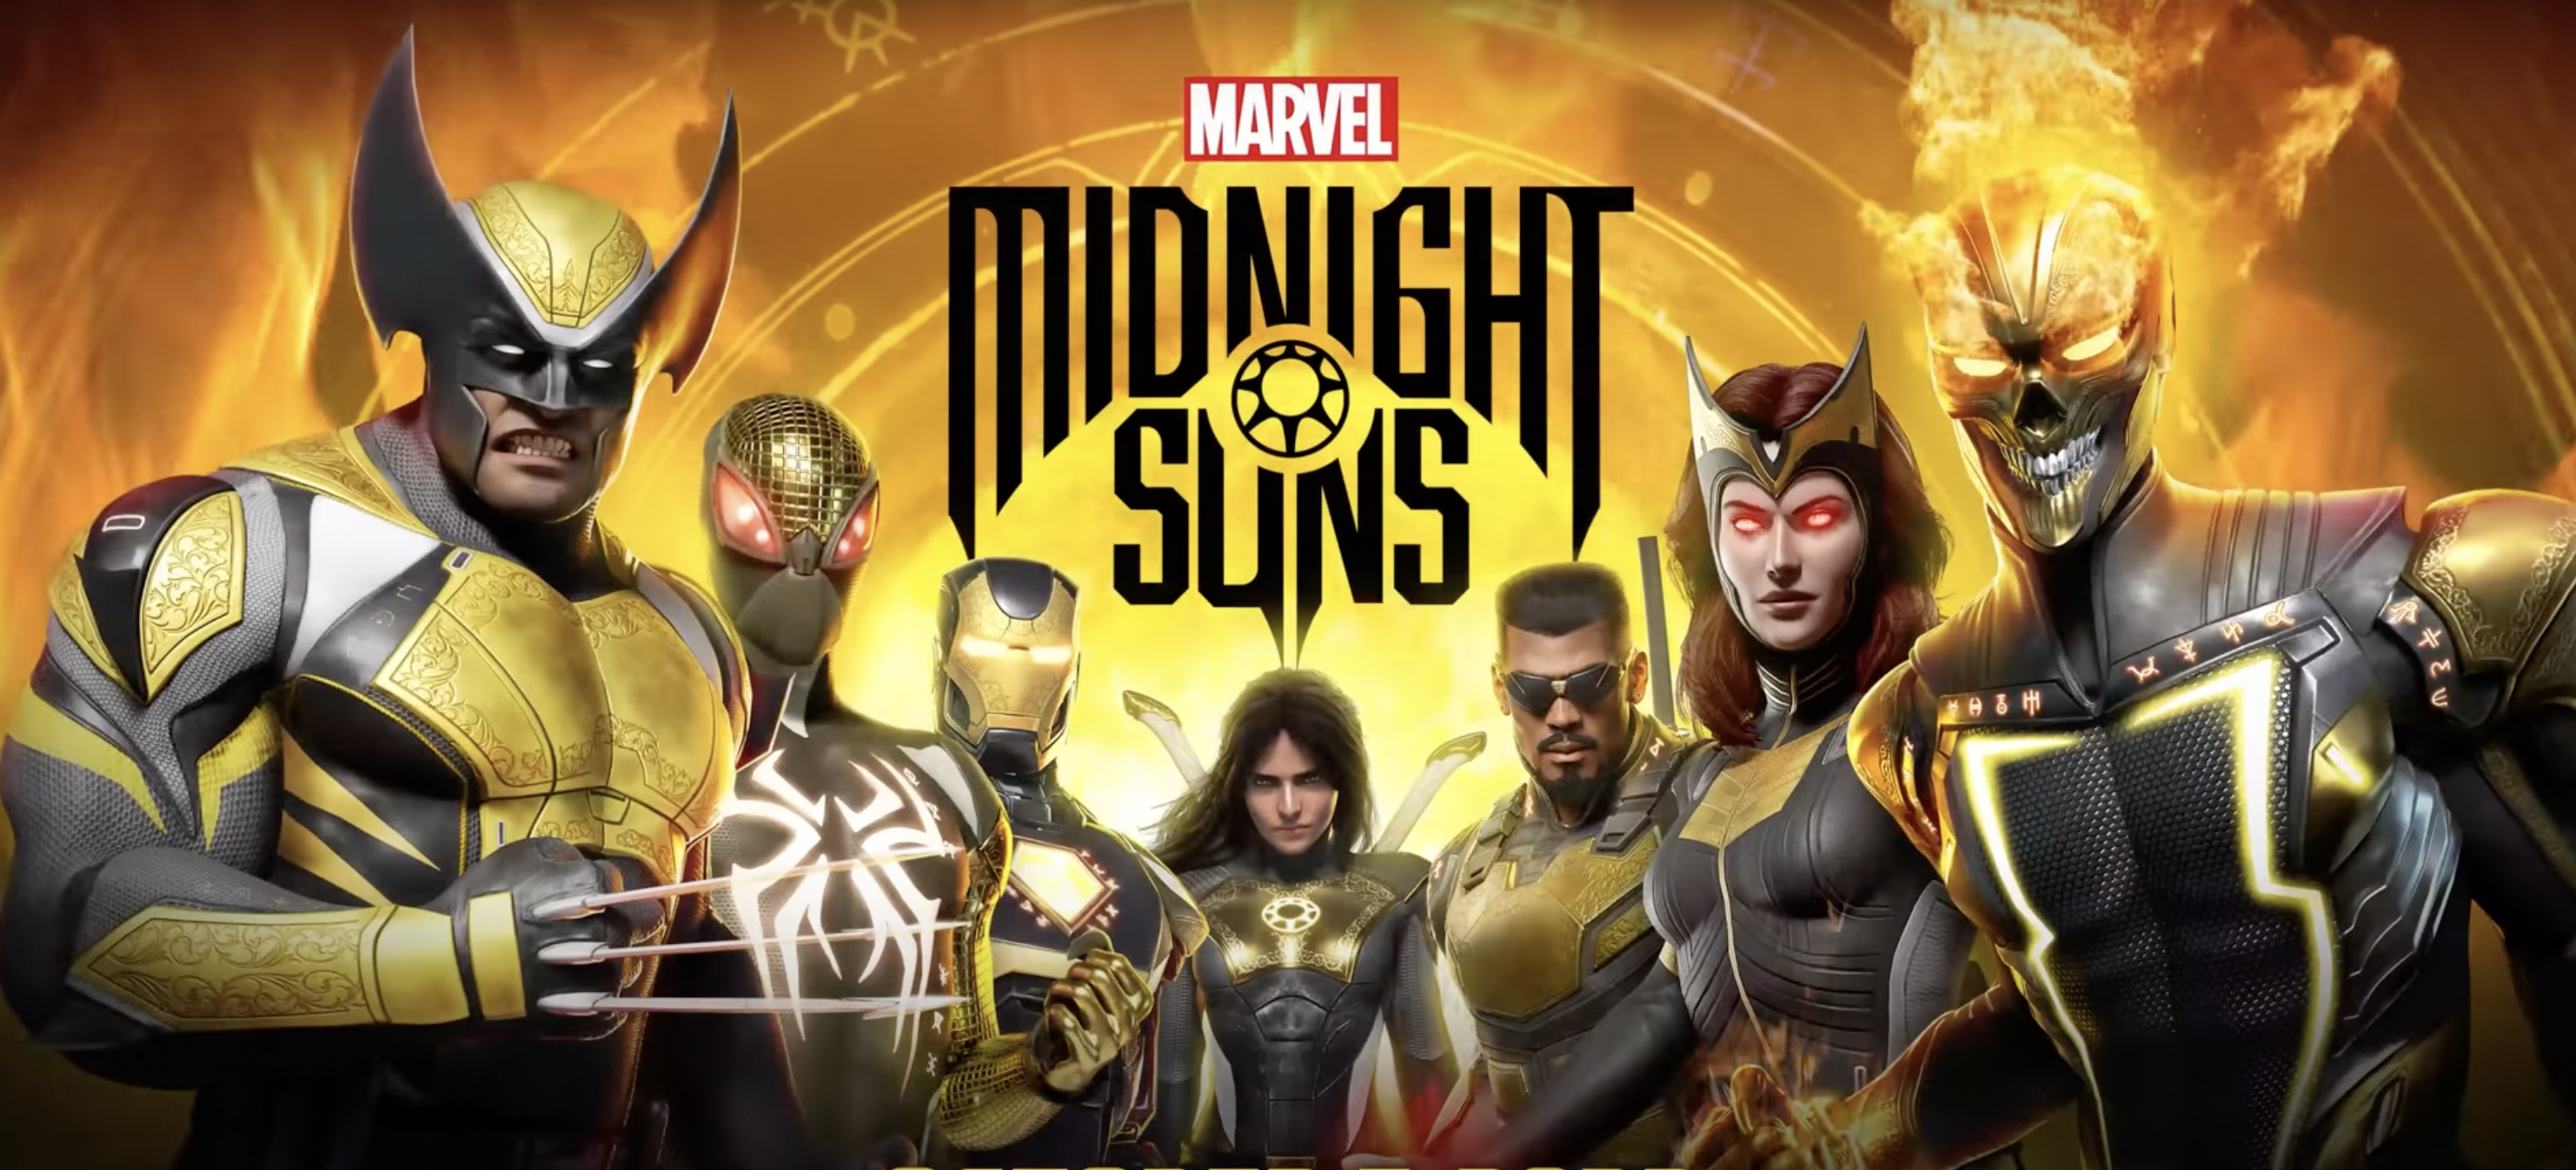 First Trailer Revealed For Marvel’s ‘Midnight Sons’